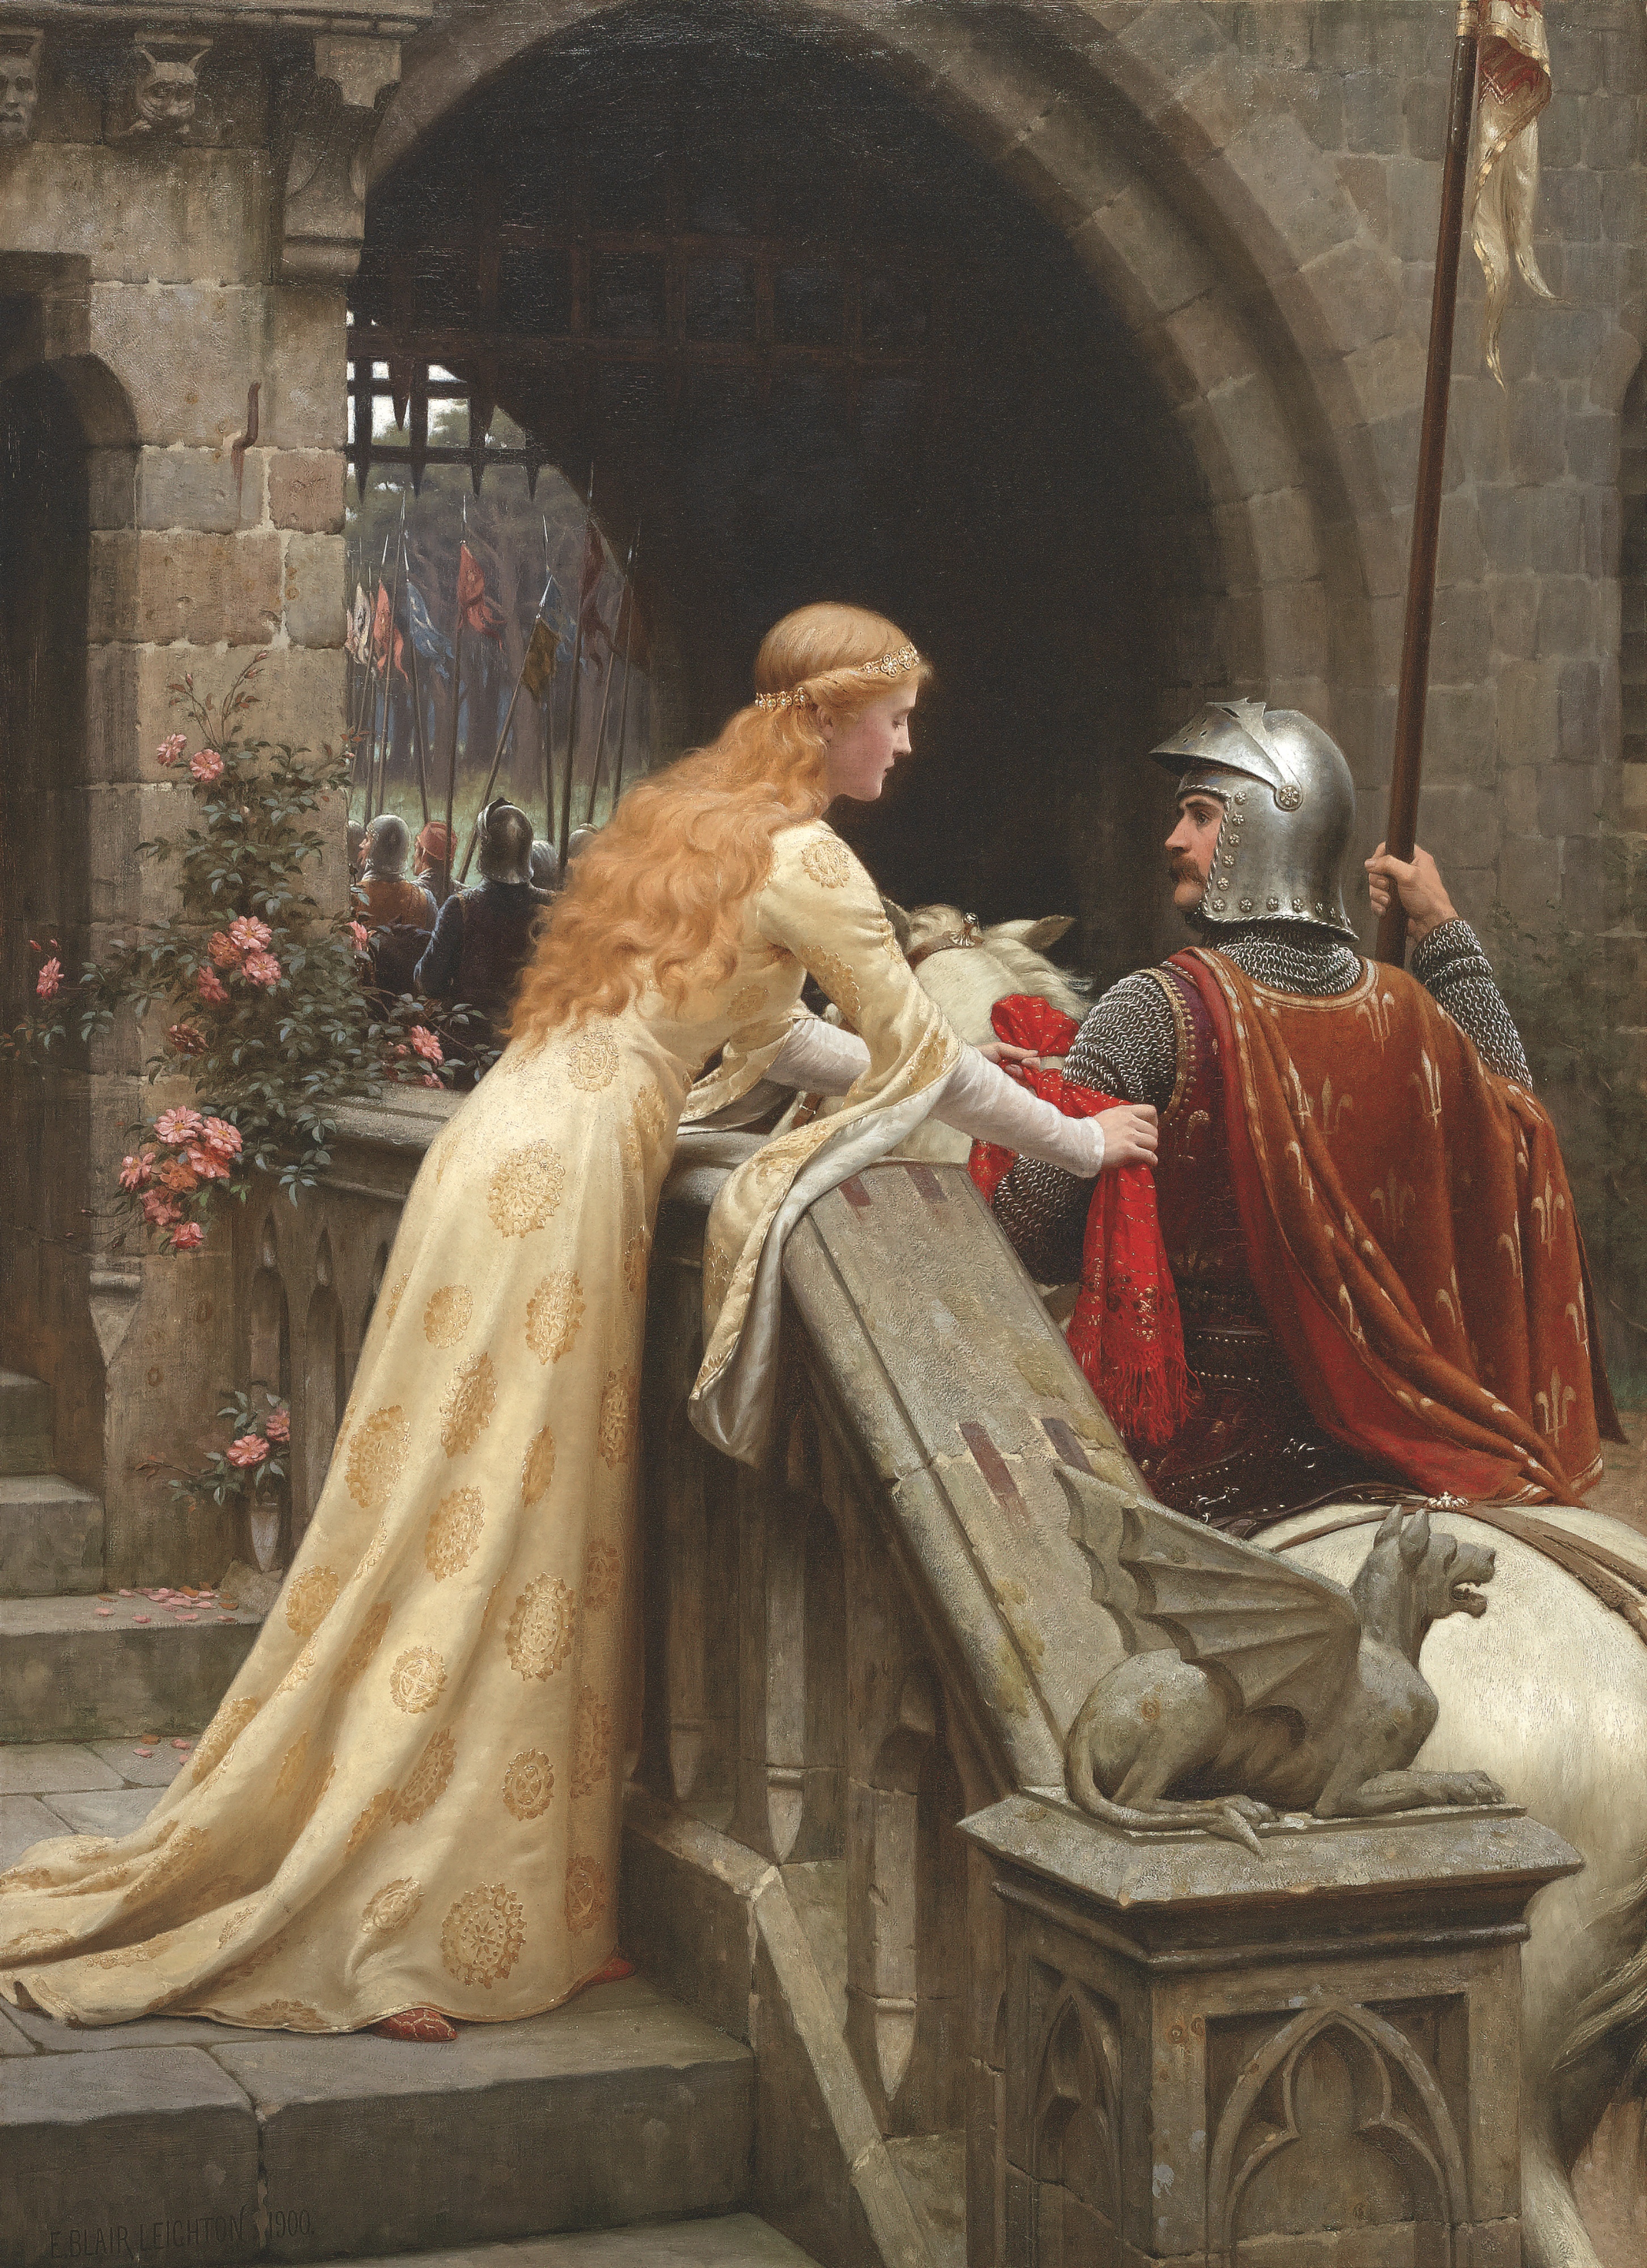 Courtly love.